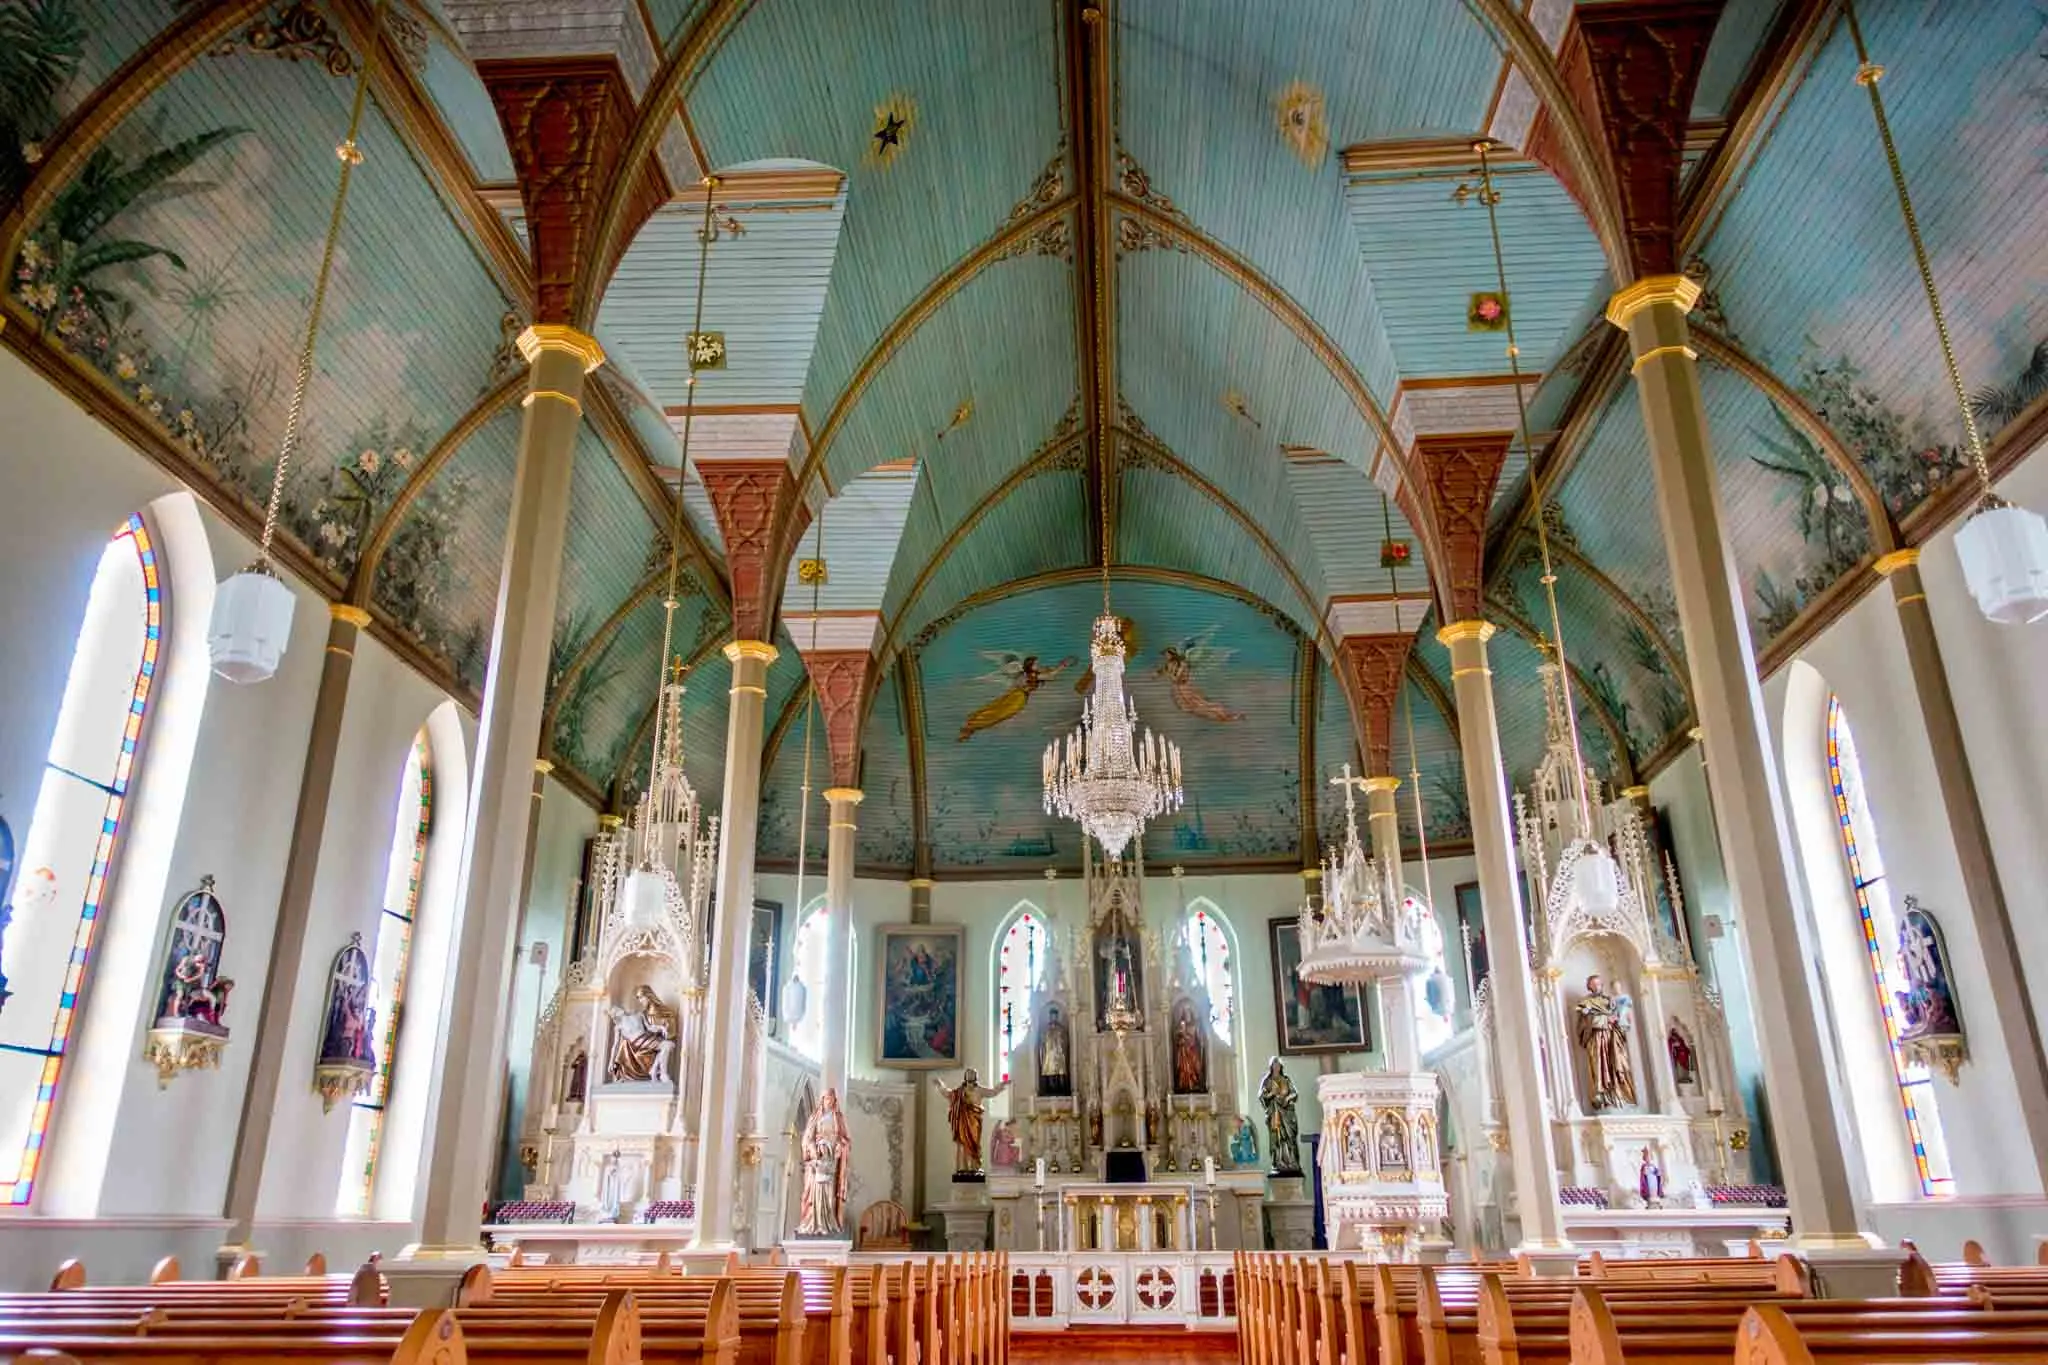 Sanctuary with blue ceiling and chandeliers